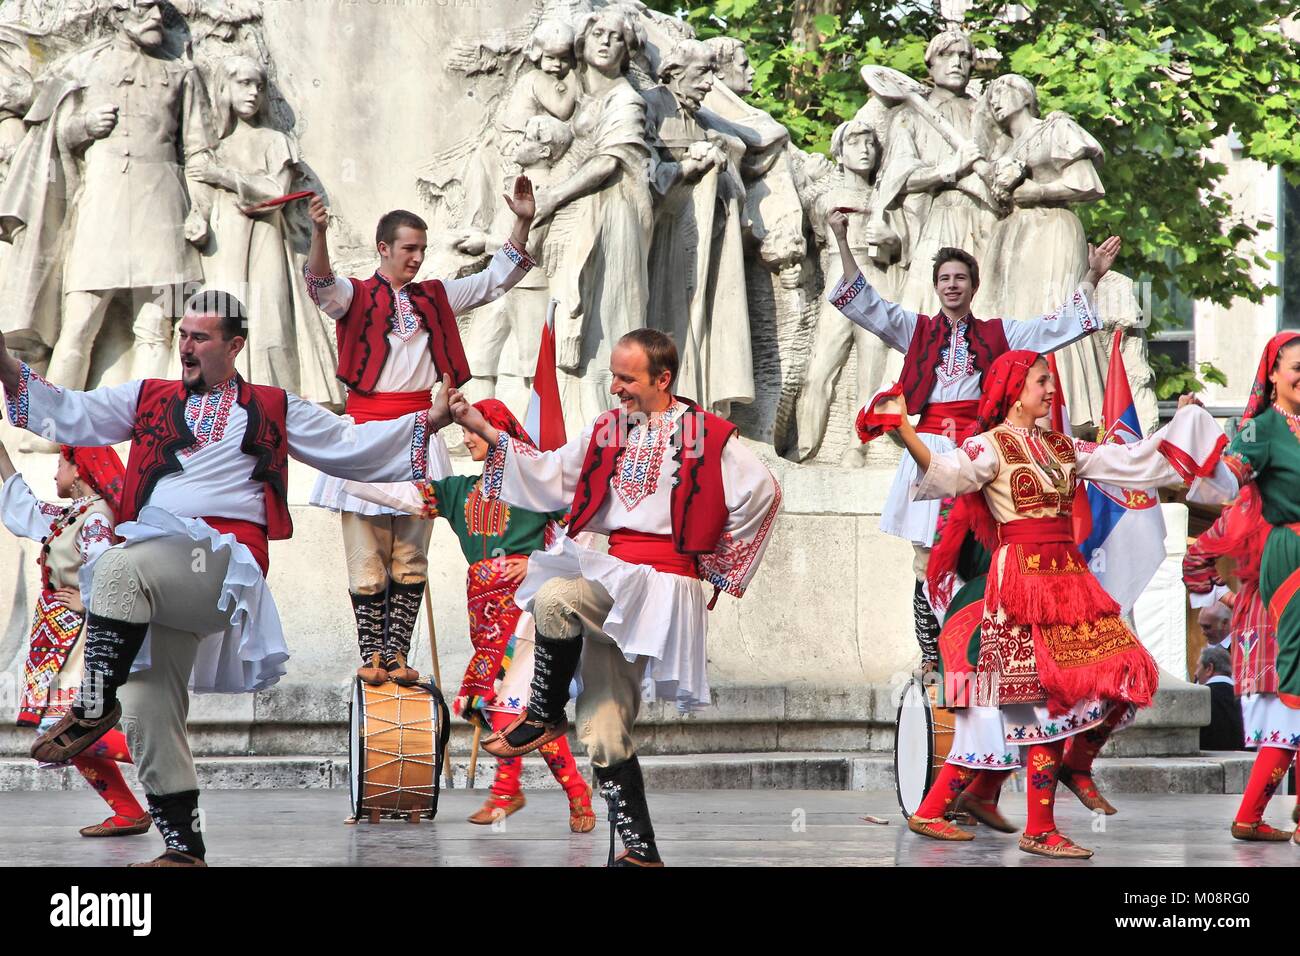 BUDAPEST, HUNGARY - JUNE 19, 2014: Bulgarian folk dance group JANTRA performs on street in Budapest. The group performs since 1996. Stock Photo